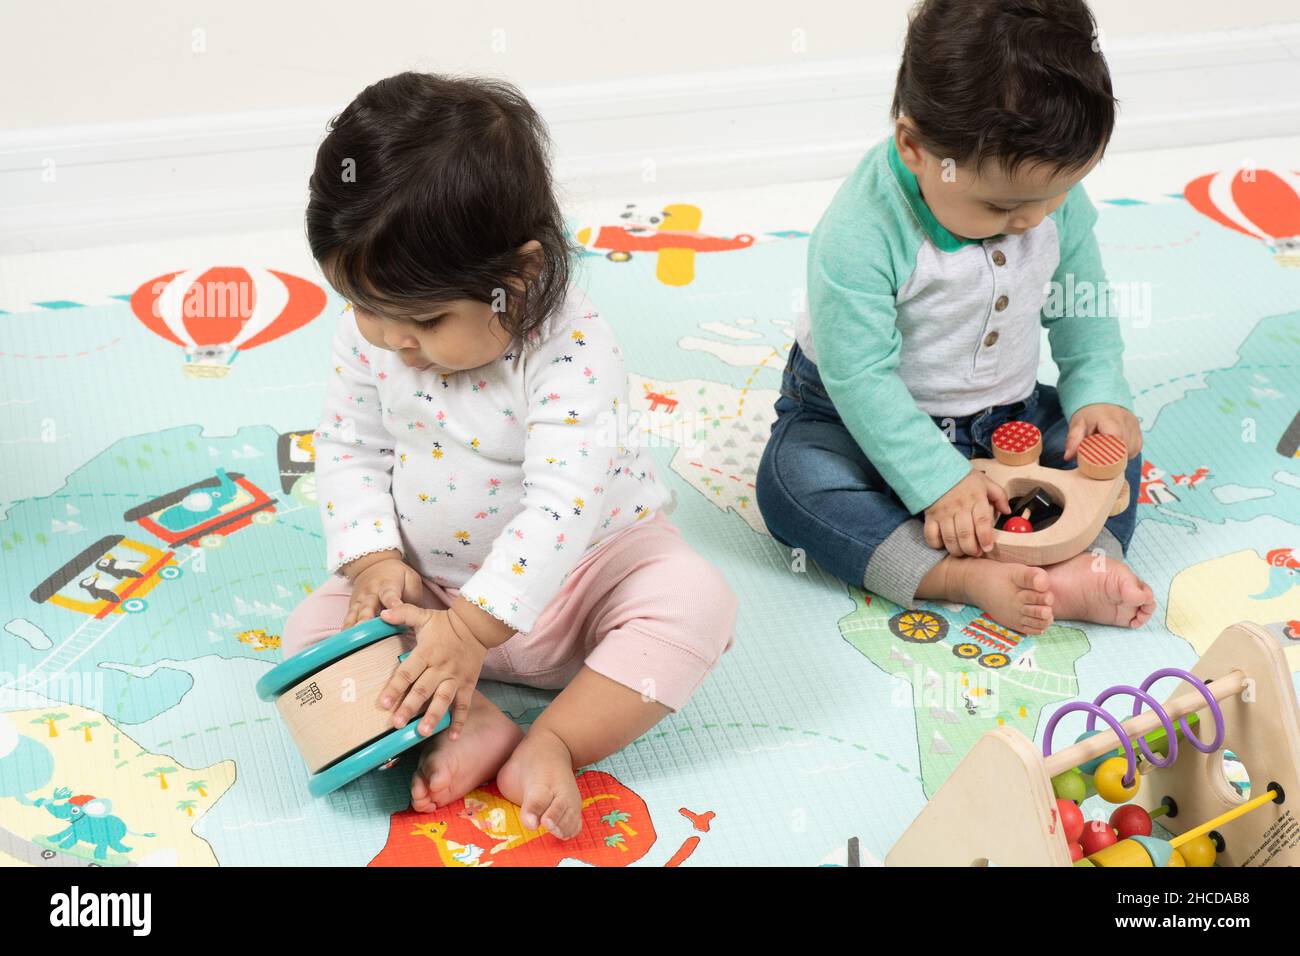 8 month old fraternal twin babies, a boy and a girl sitting near each other playing separately Stock Photo